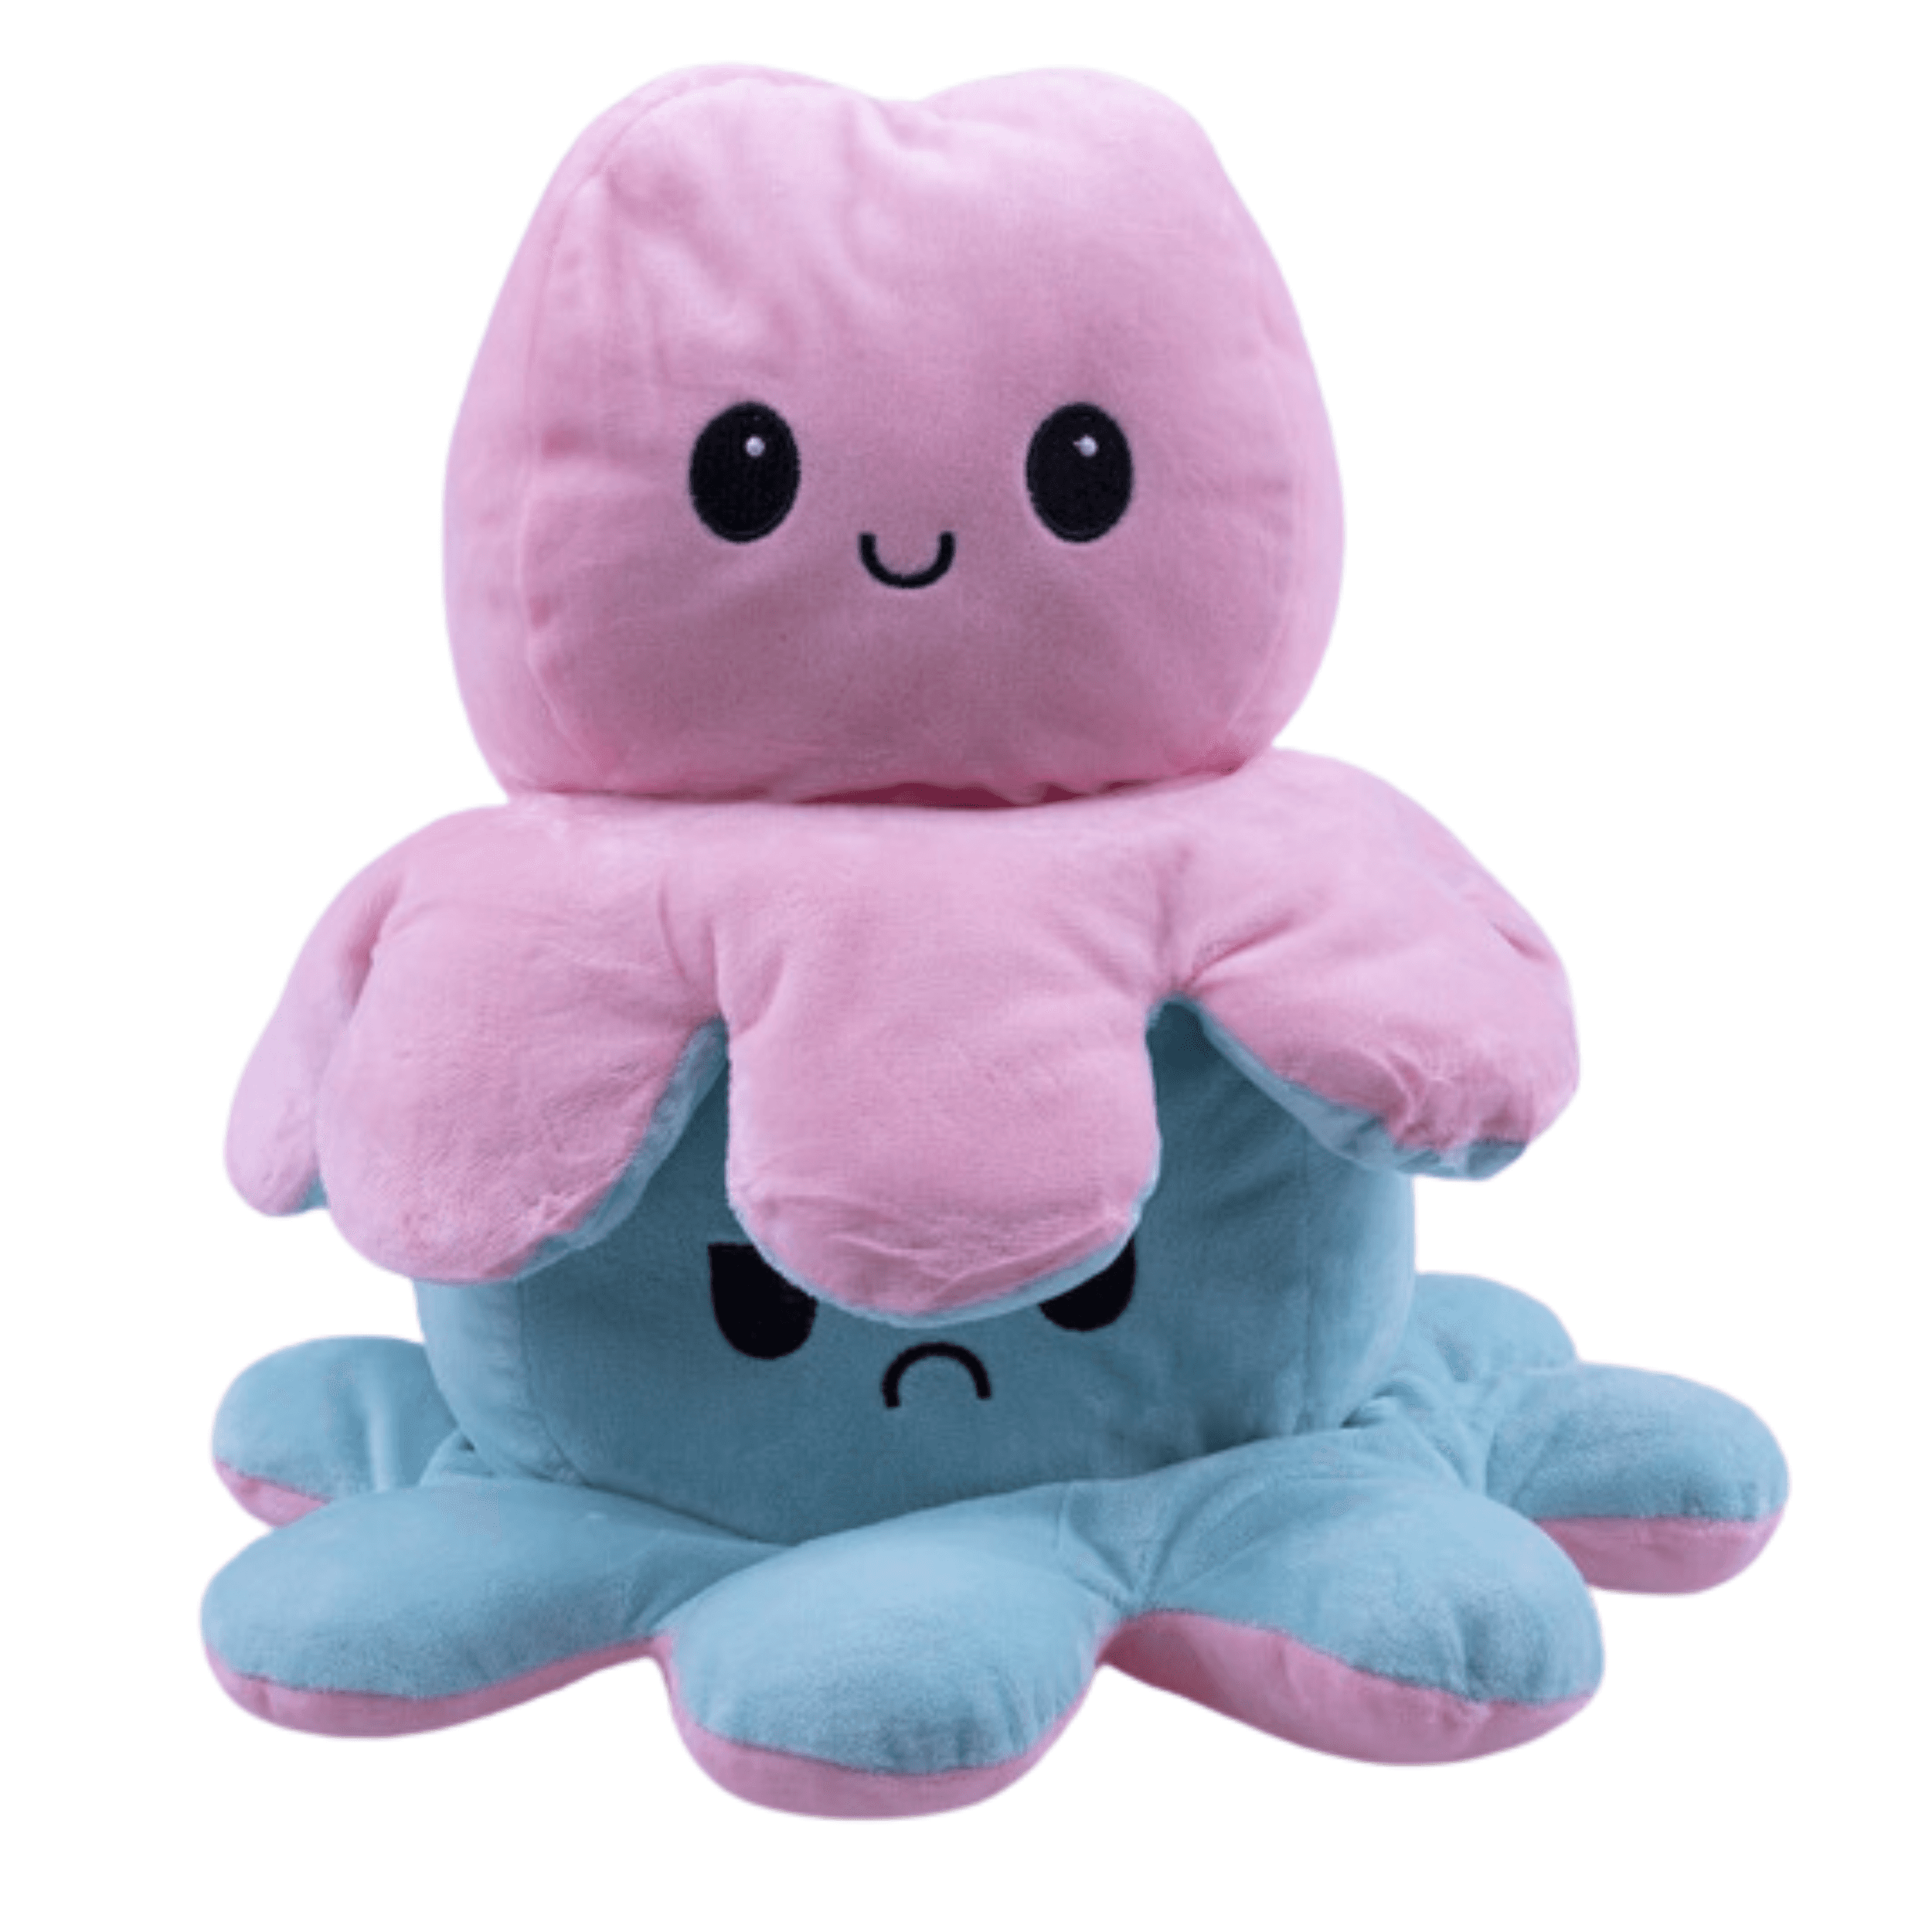 Octopus double-sided mascot 20 cm - light blue & pink